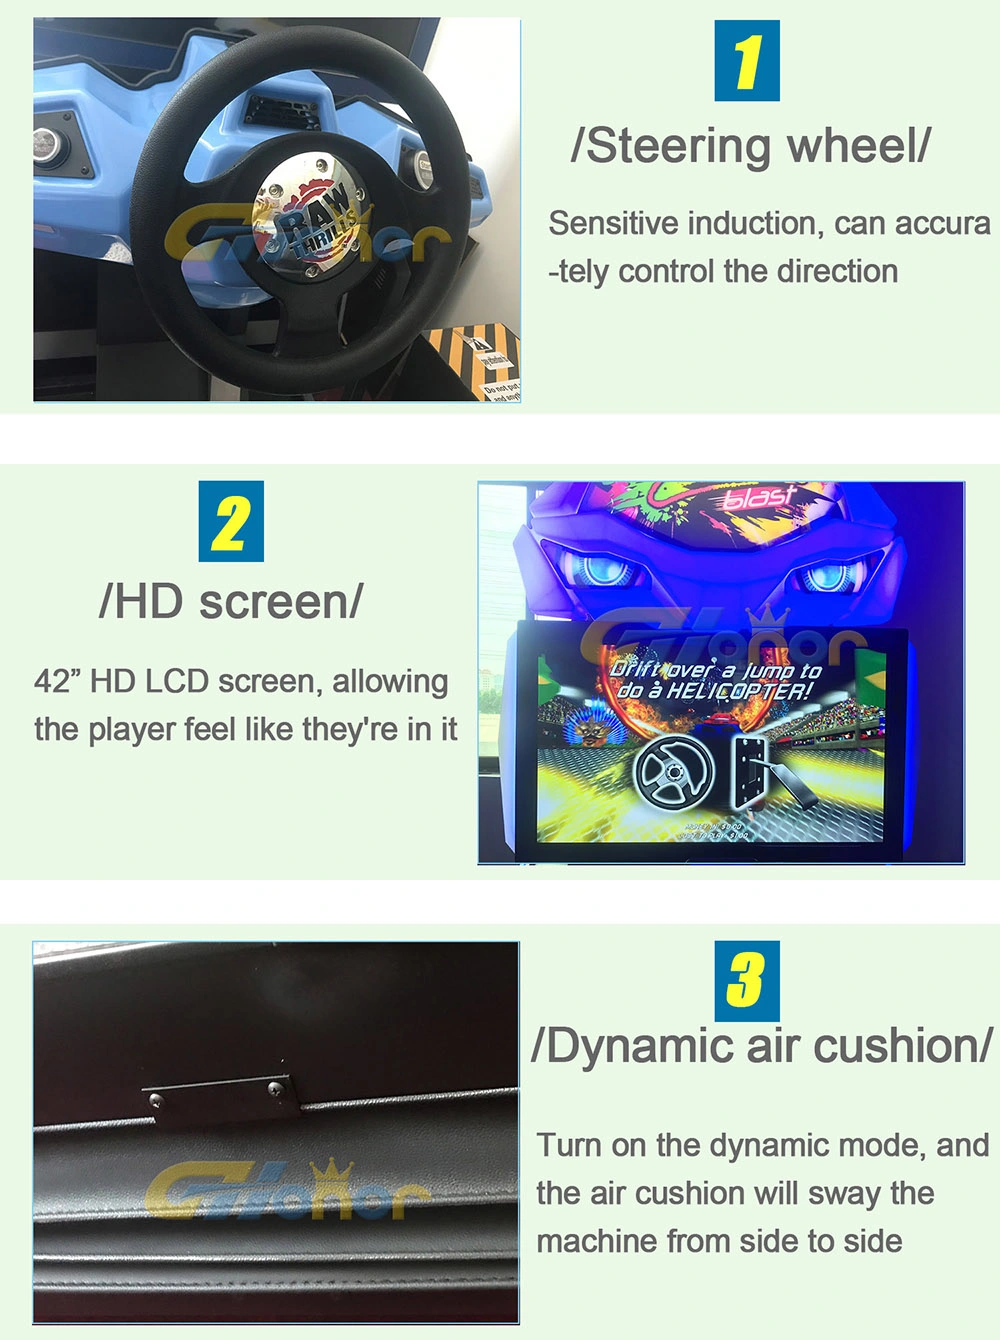 Sell Indoor Arcade Game Machine Dynamic Racing Racing Game Adult Racing Game Arcade Coin-Operated Entertainment Electronic Racing Game Machine